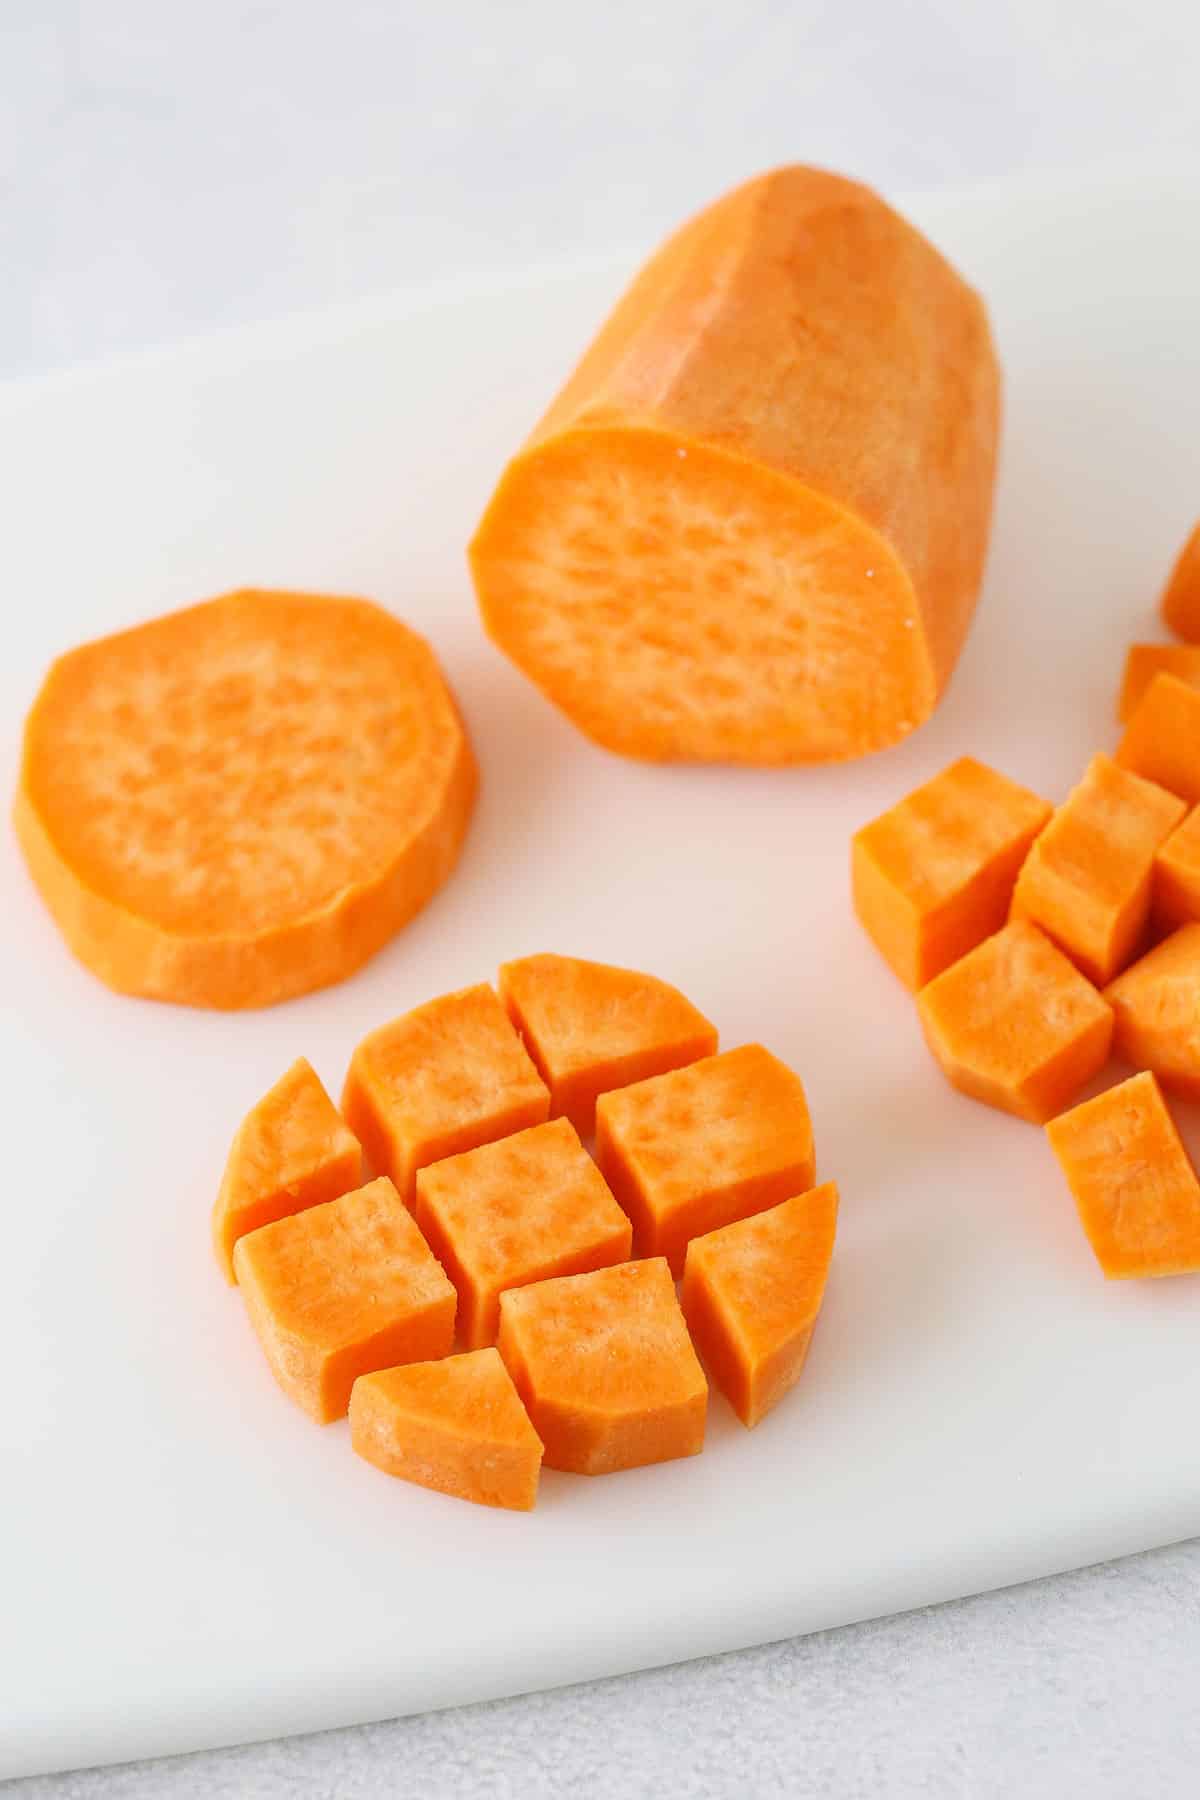 Half Inch Cubes of a Peeled Sweet Potato on a Cutting Board